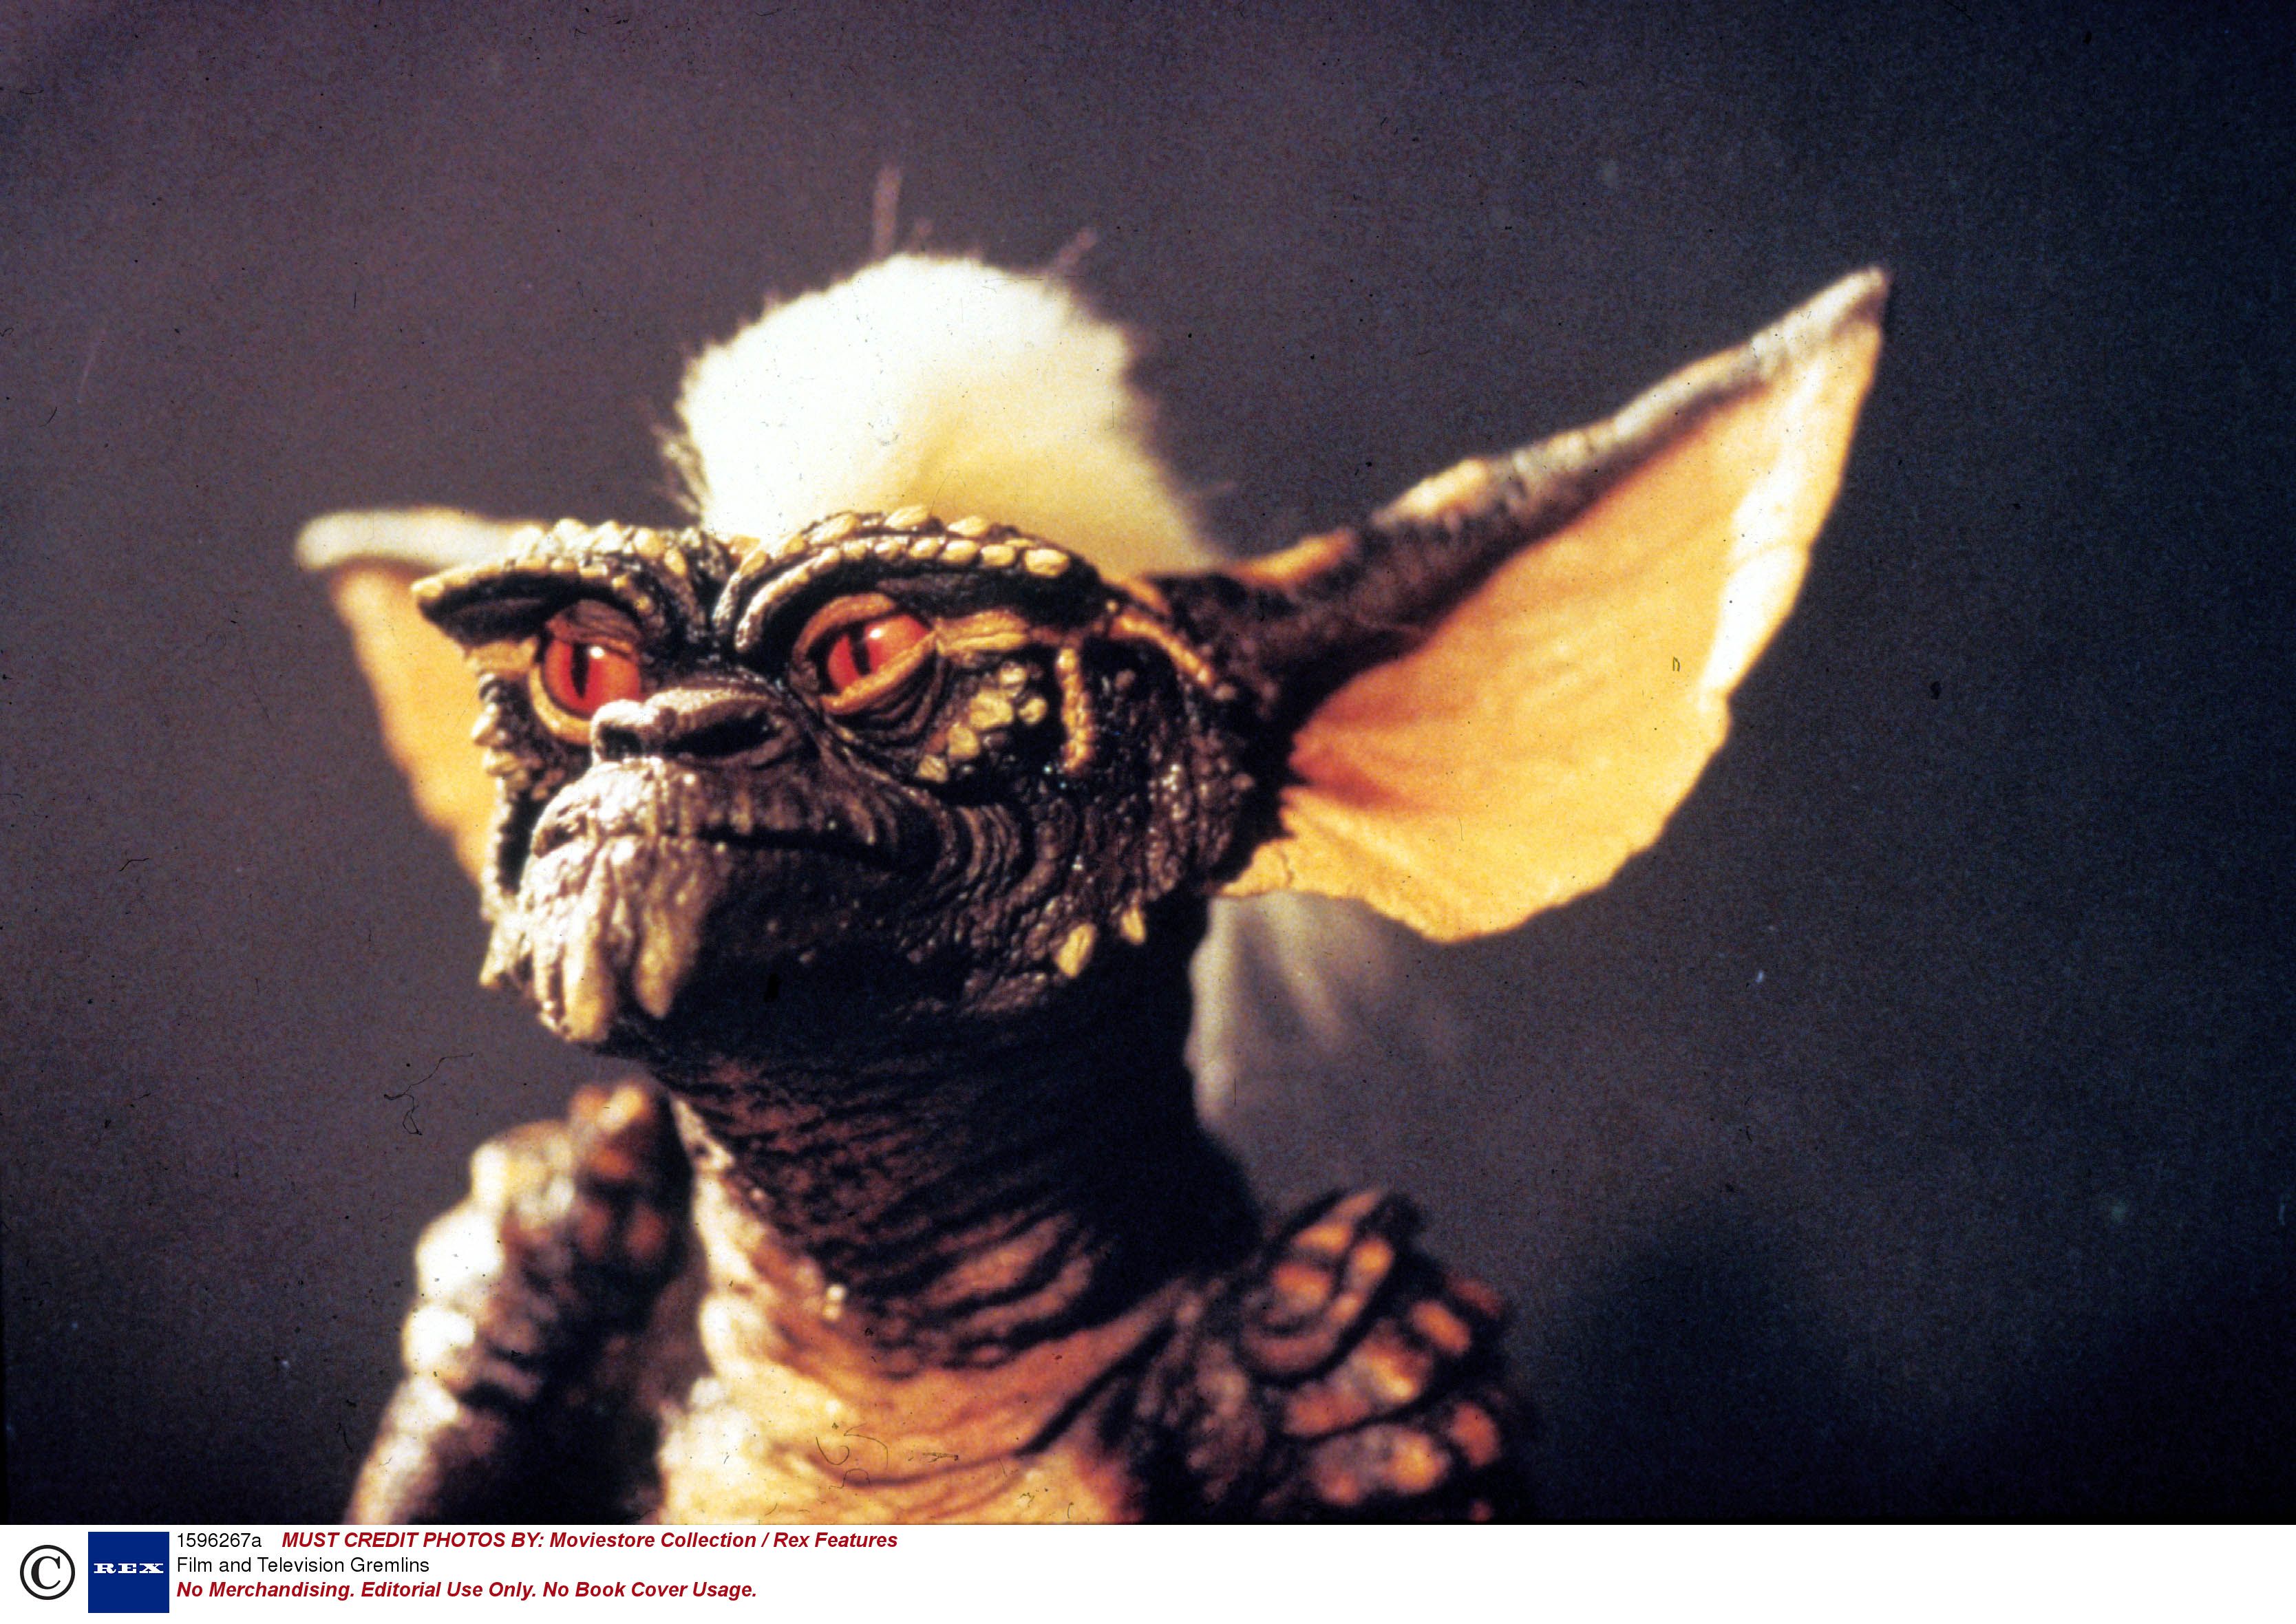 Gremlins': The Moments